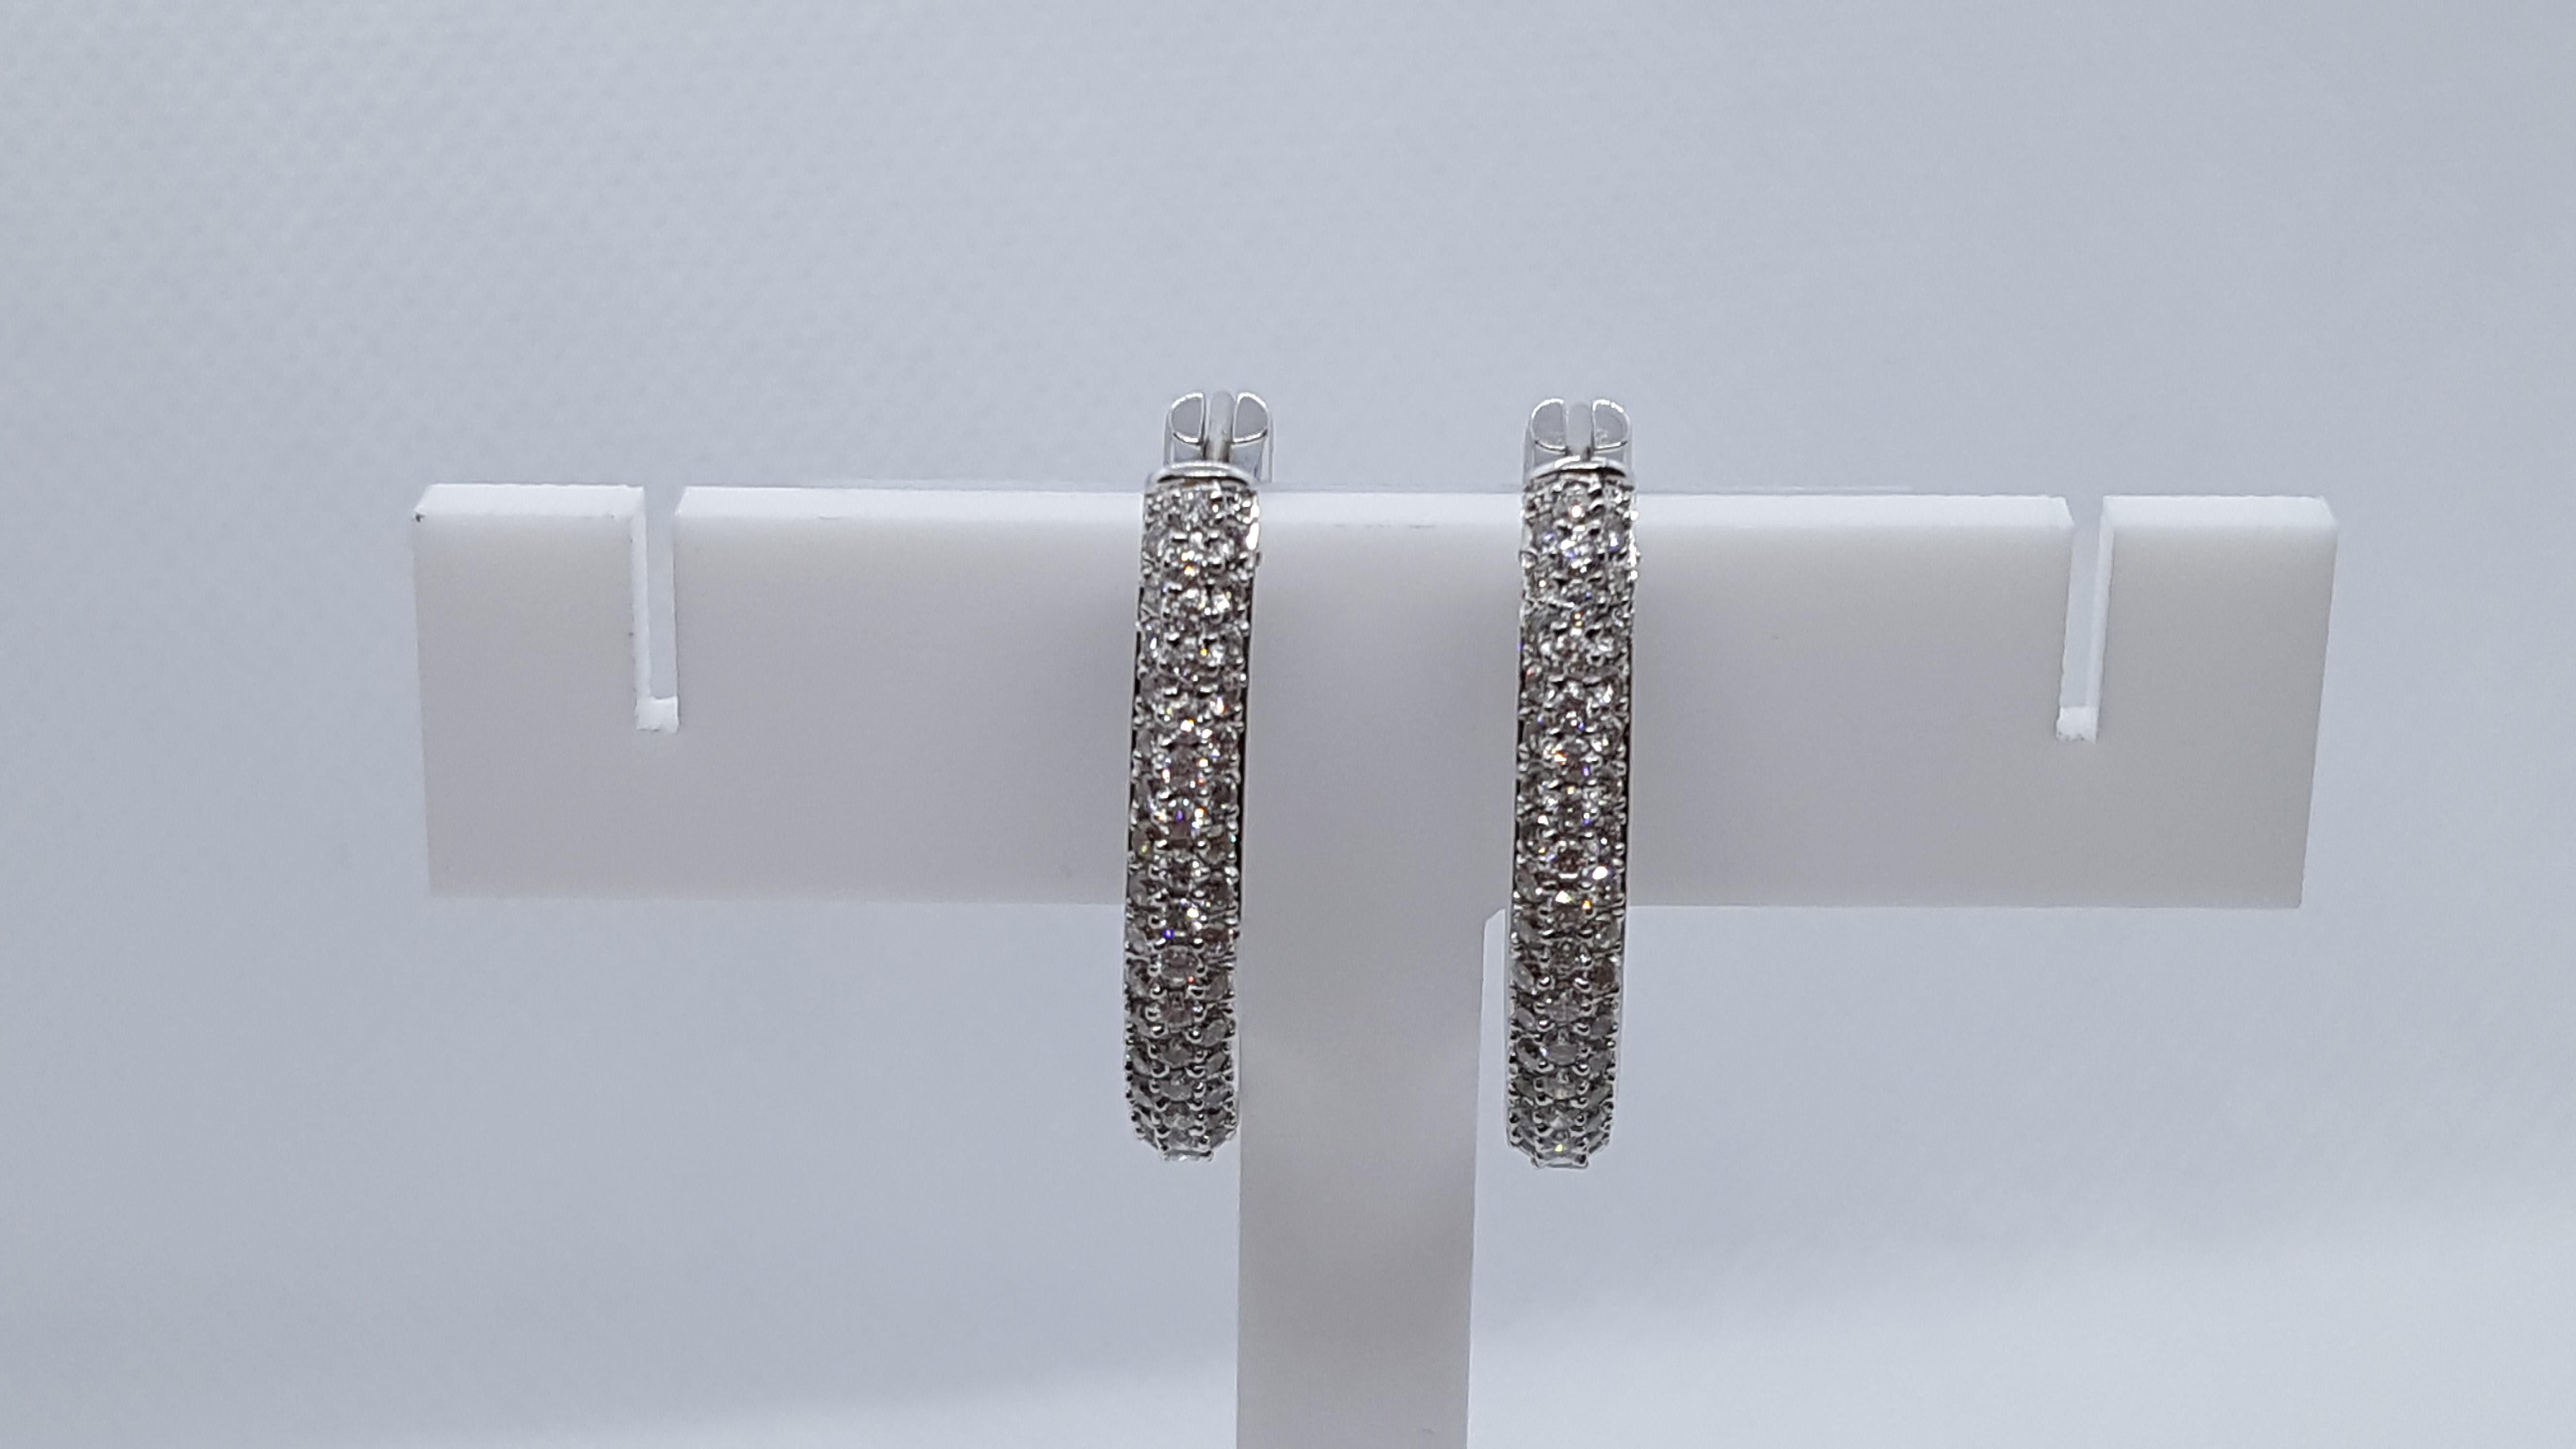 18kt White Gold Pave 1.75cttw Diamond Hoop Earrings, Inside-Out Style, Techline  In Good Condition For Sale In Rancho Santa Fe, CA